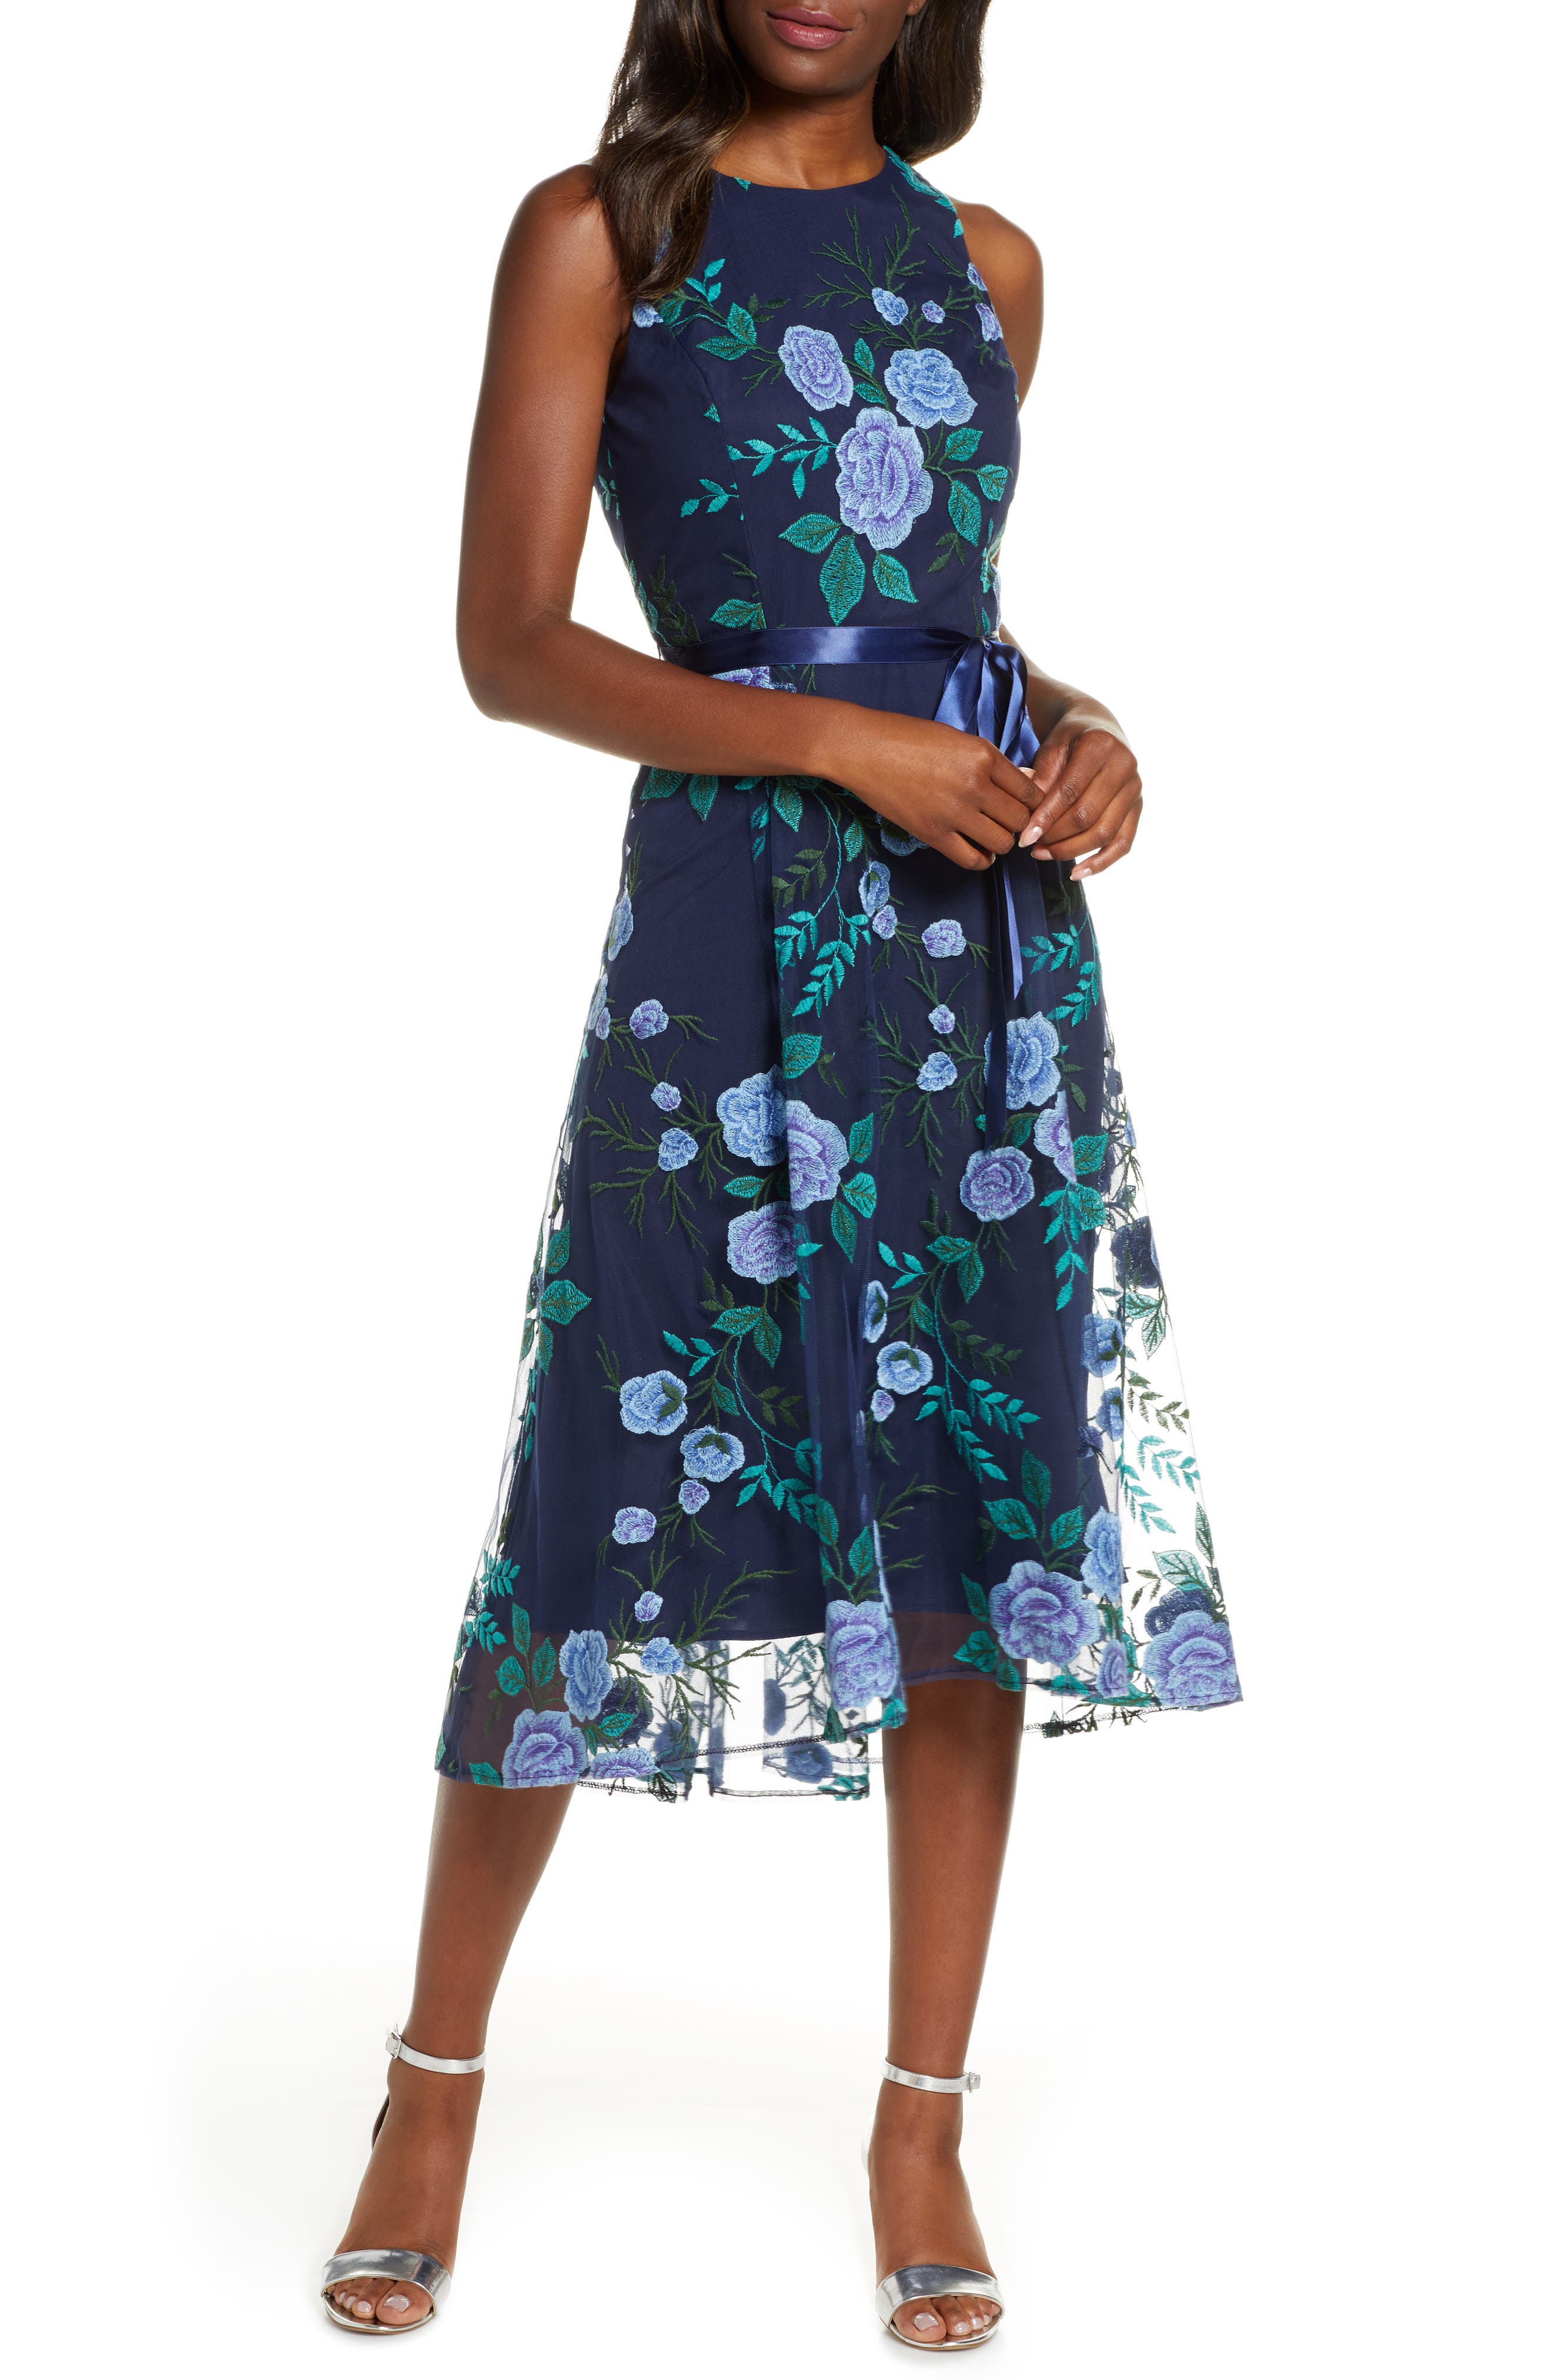 Tahari Floral Embroidered Dress Outlet ...